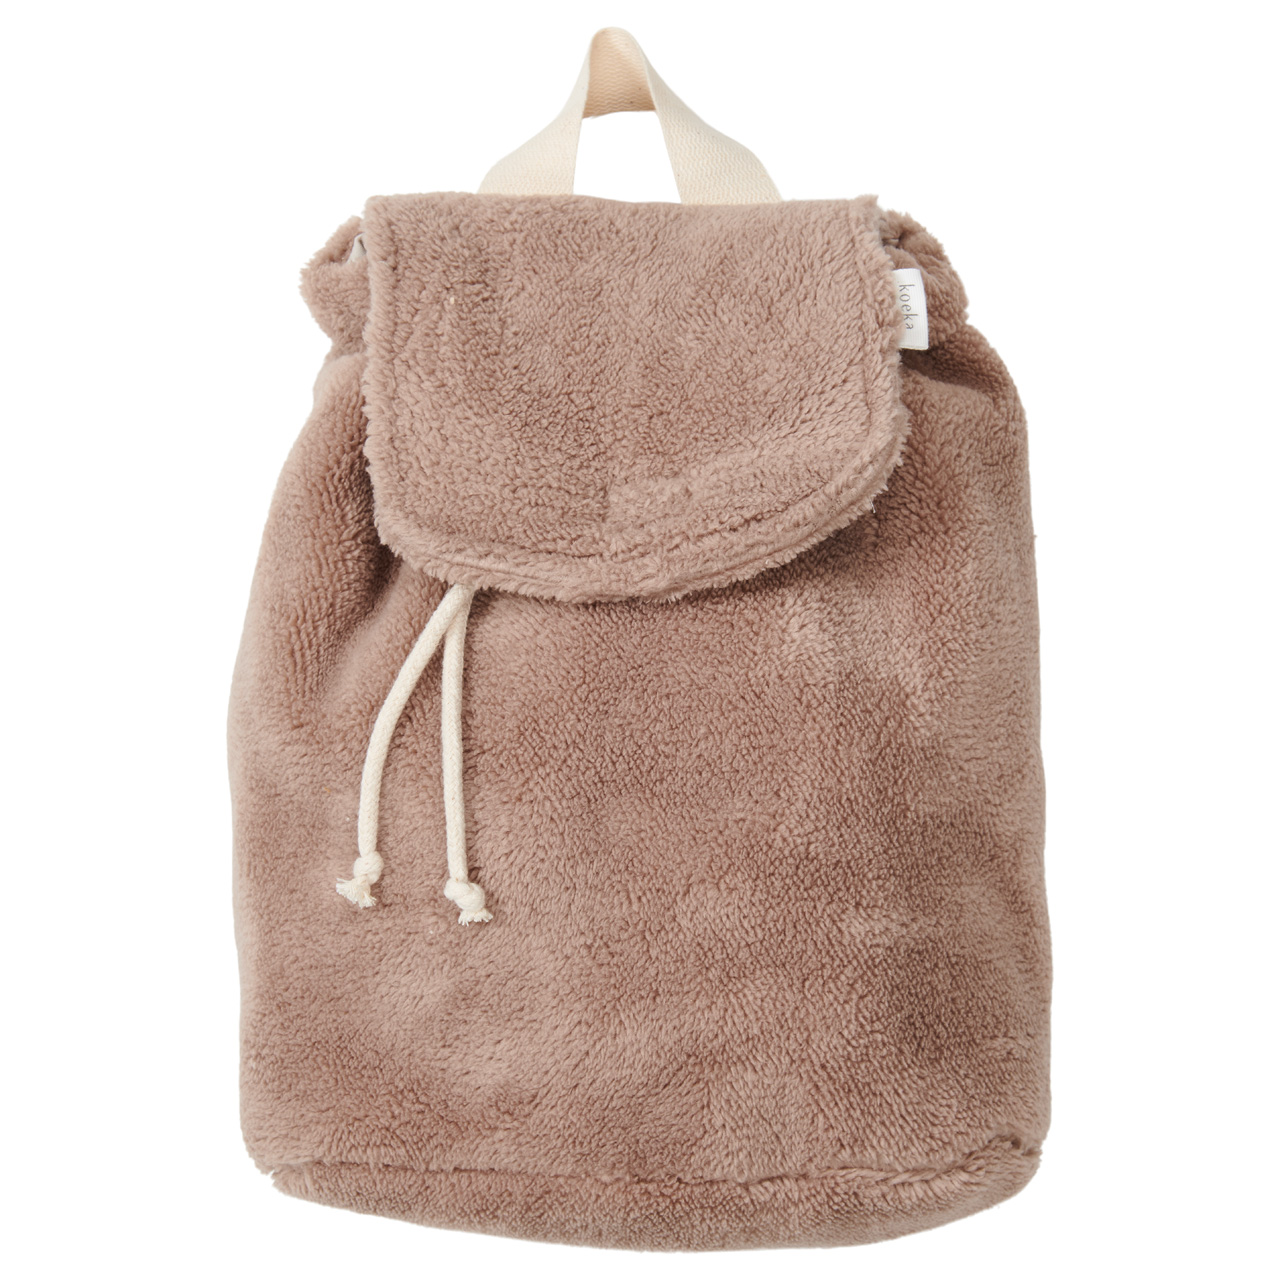 Baby backpack Malmo chestnut